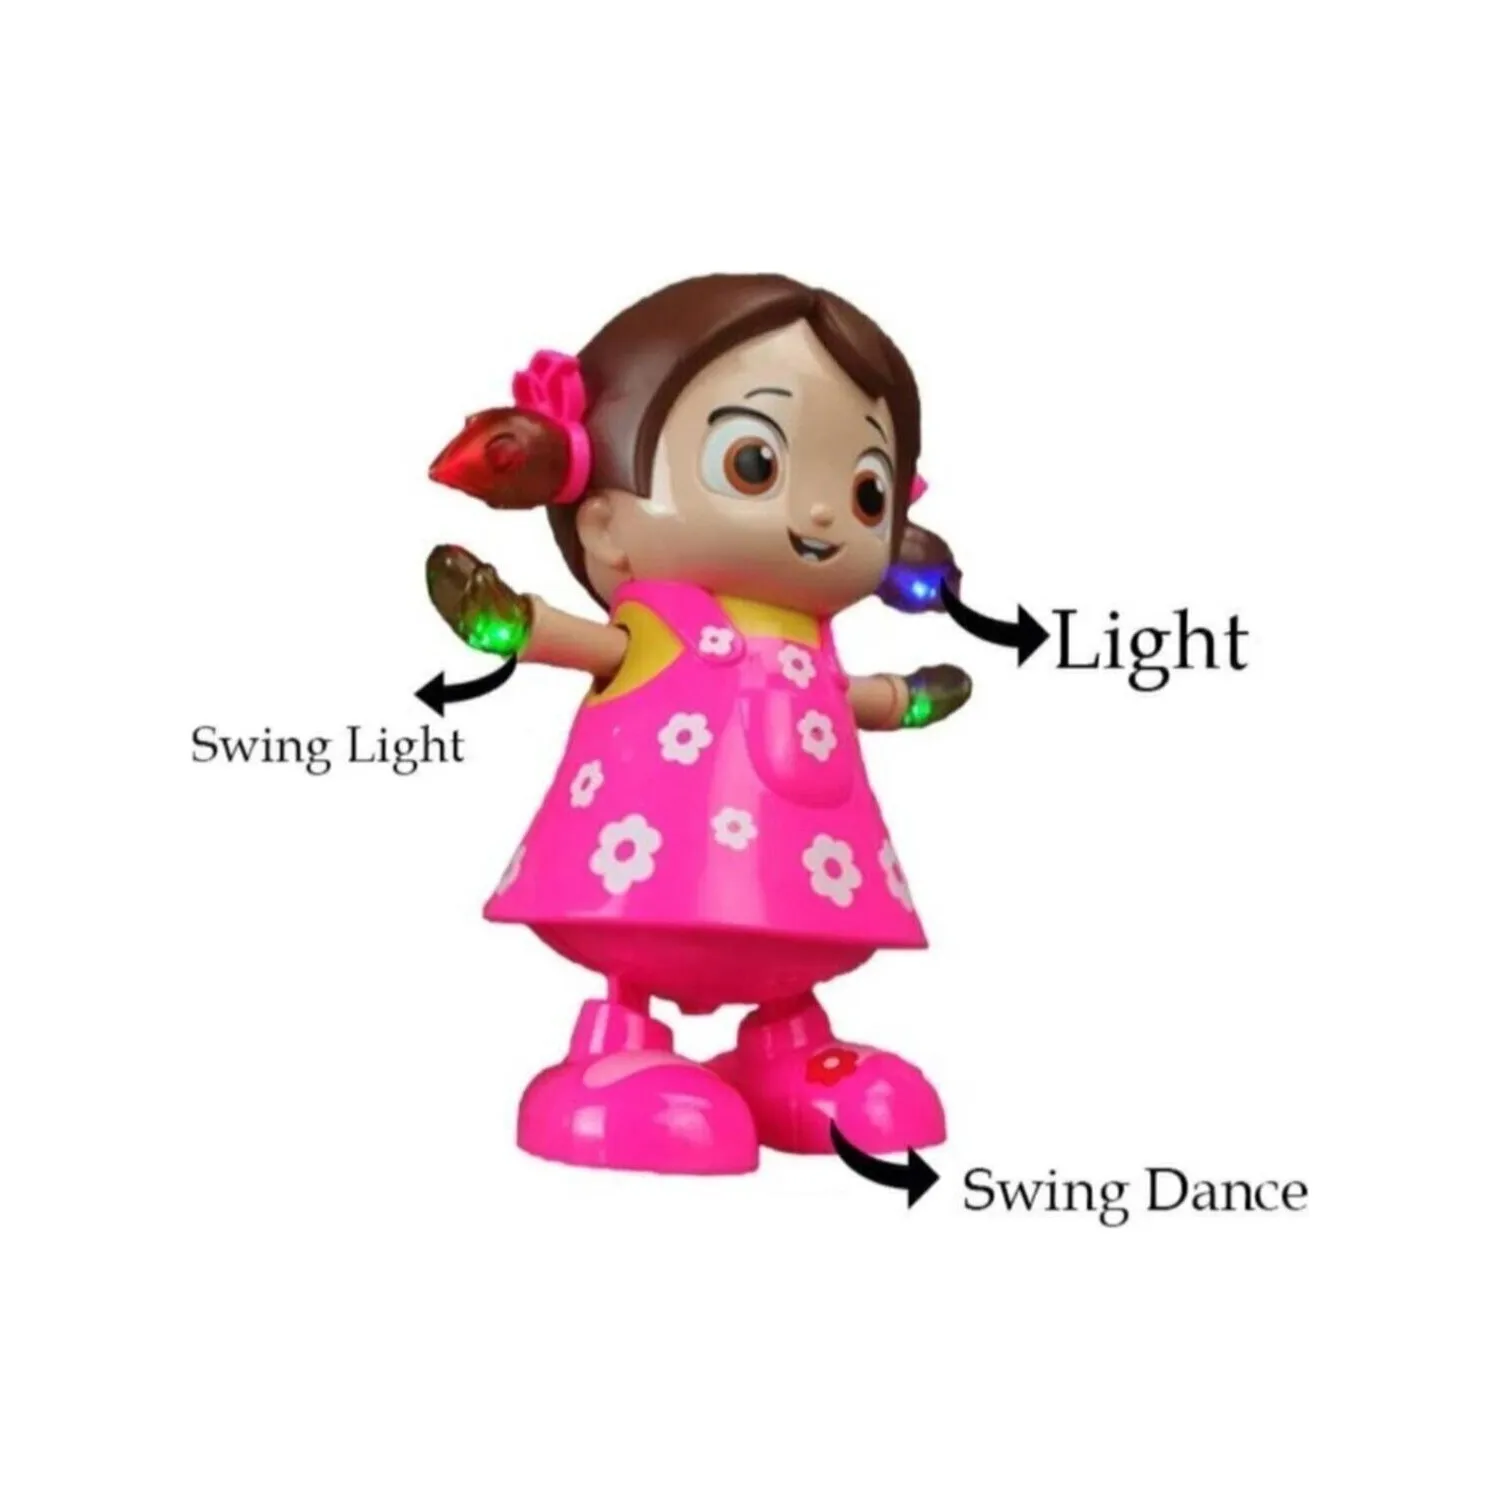 LEVIATHAN 3D Lights Dancing Musical Doll for Kids Birthday Gift toy(Angel  Girl)MultiColor - 3D Lights Dancing Musical Doll for Kids Birthday Gift  toy(Angel Girl)MultiColor . Buy dancing doll toys in India. shop